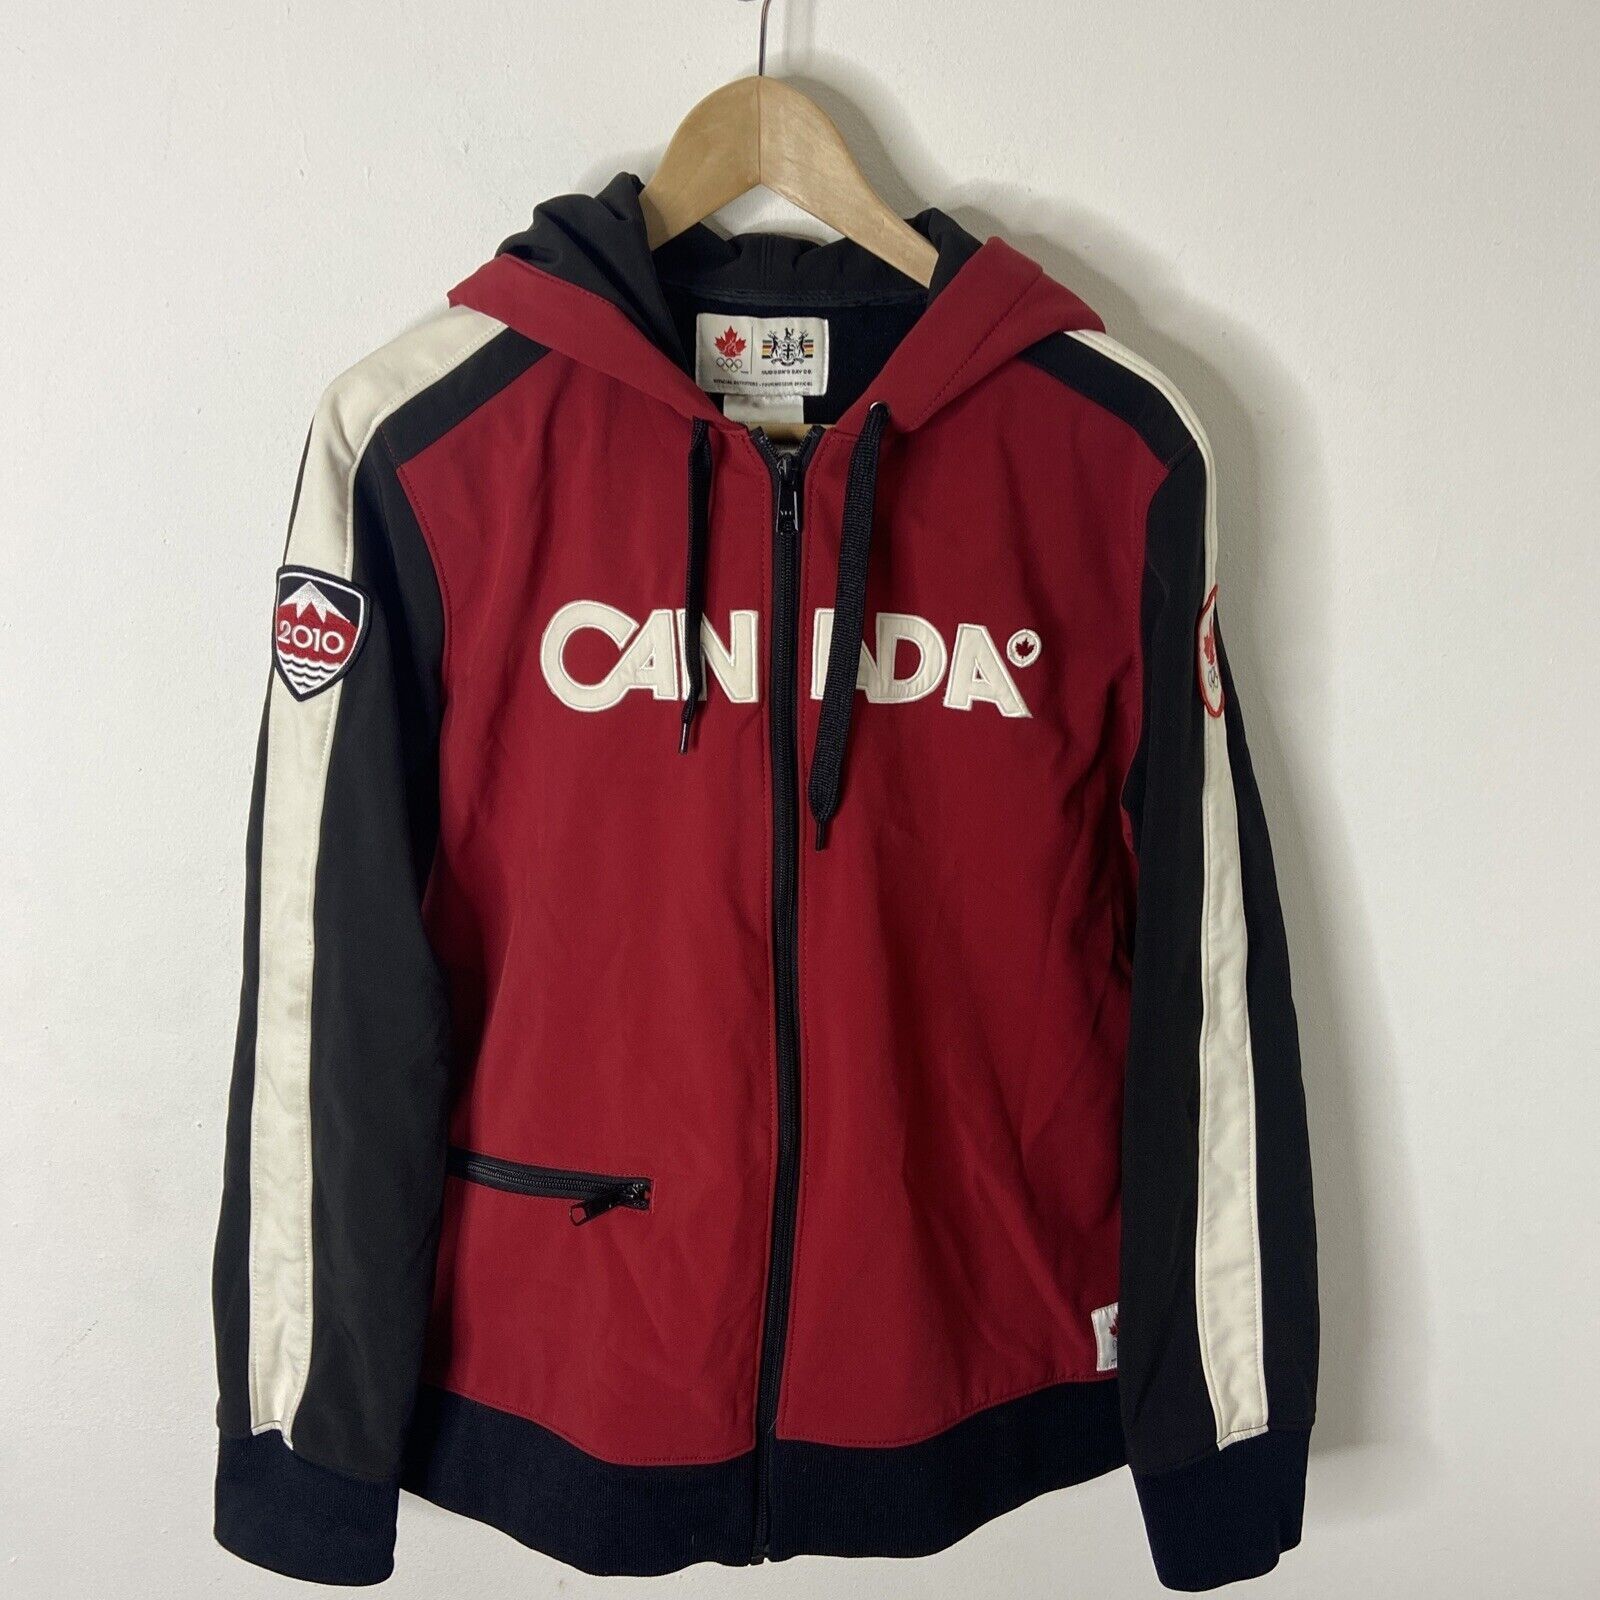 Hudsons Bay Hudsons Bay Woman 2XL Canada 2010 Vancouver Soft Shell Jacke Size XXL / US 16-18 / IT 52-54 - 1 Preview